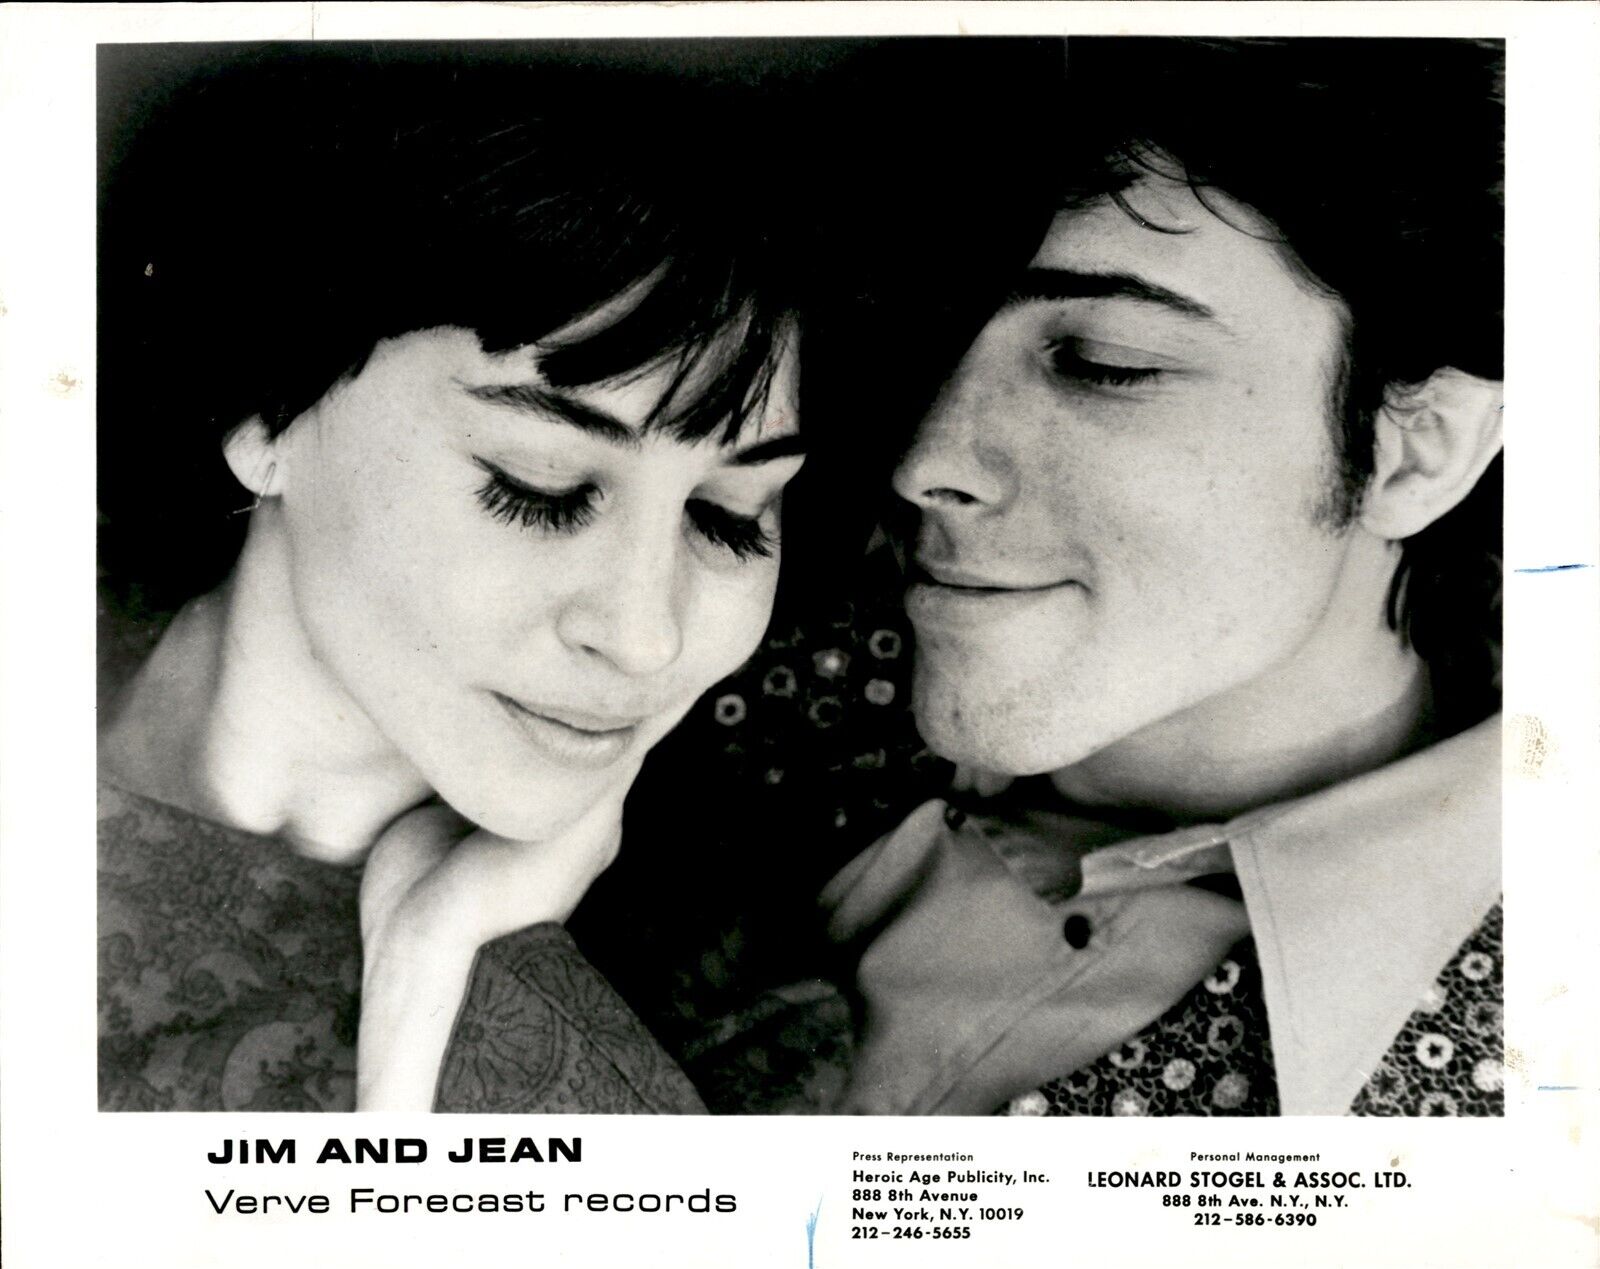 LD343 1968 Wire Photo AMERICAN FOLK MUSIC DUO JIM AND JEAN Jim Glover Jean Ray